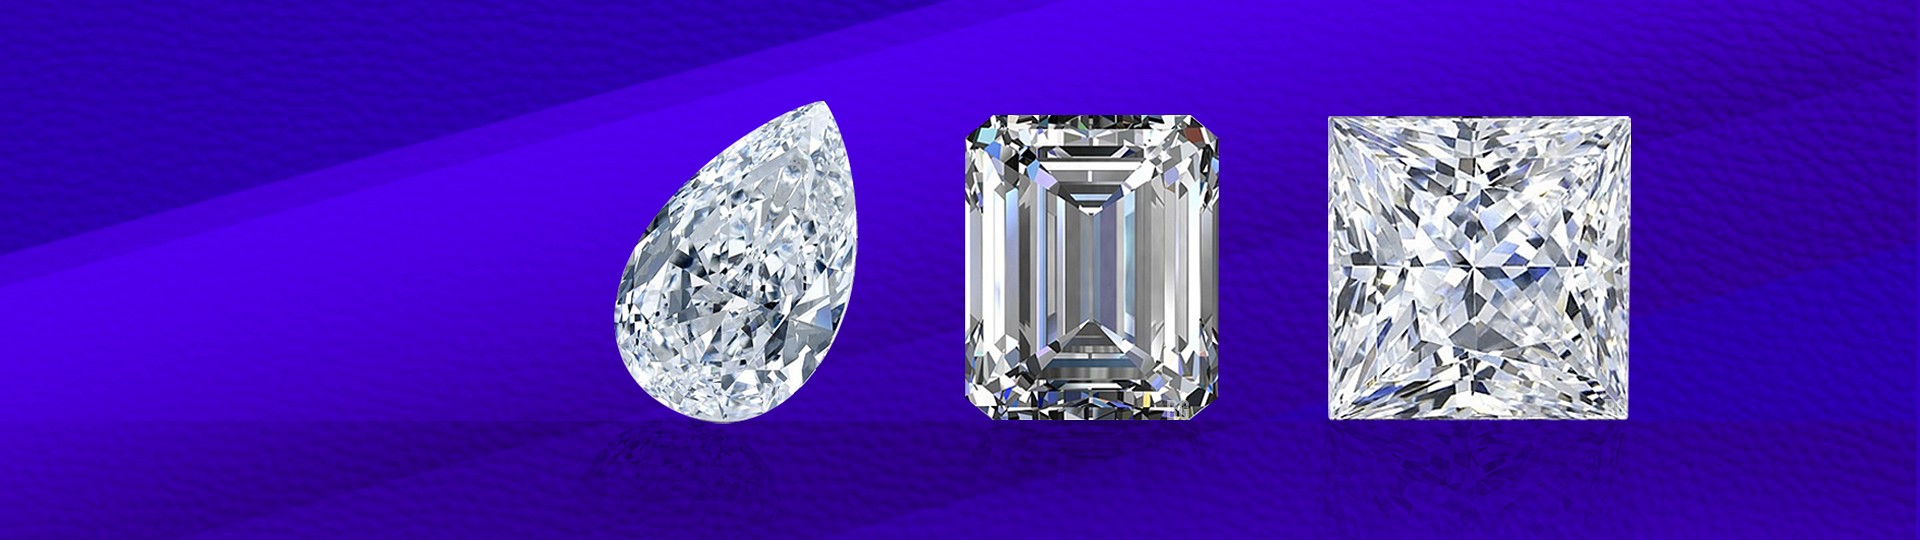 Investment Diamonds (GIA) Graded | Day 2 by Bid Global International Auctioneers LLC